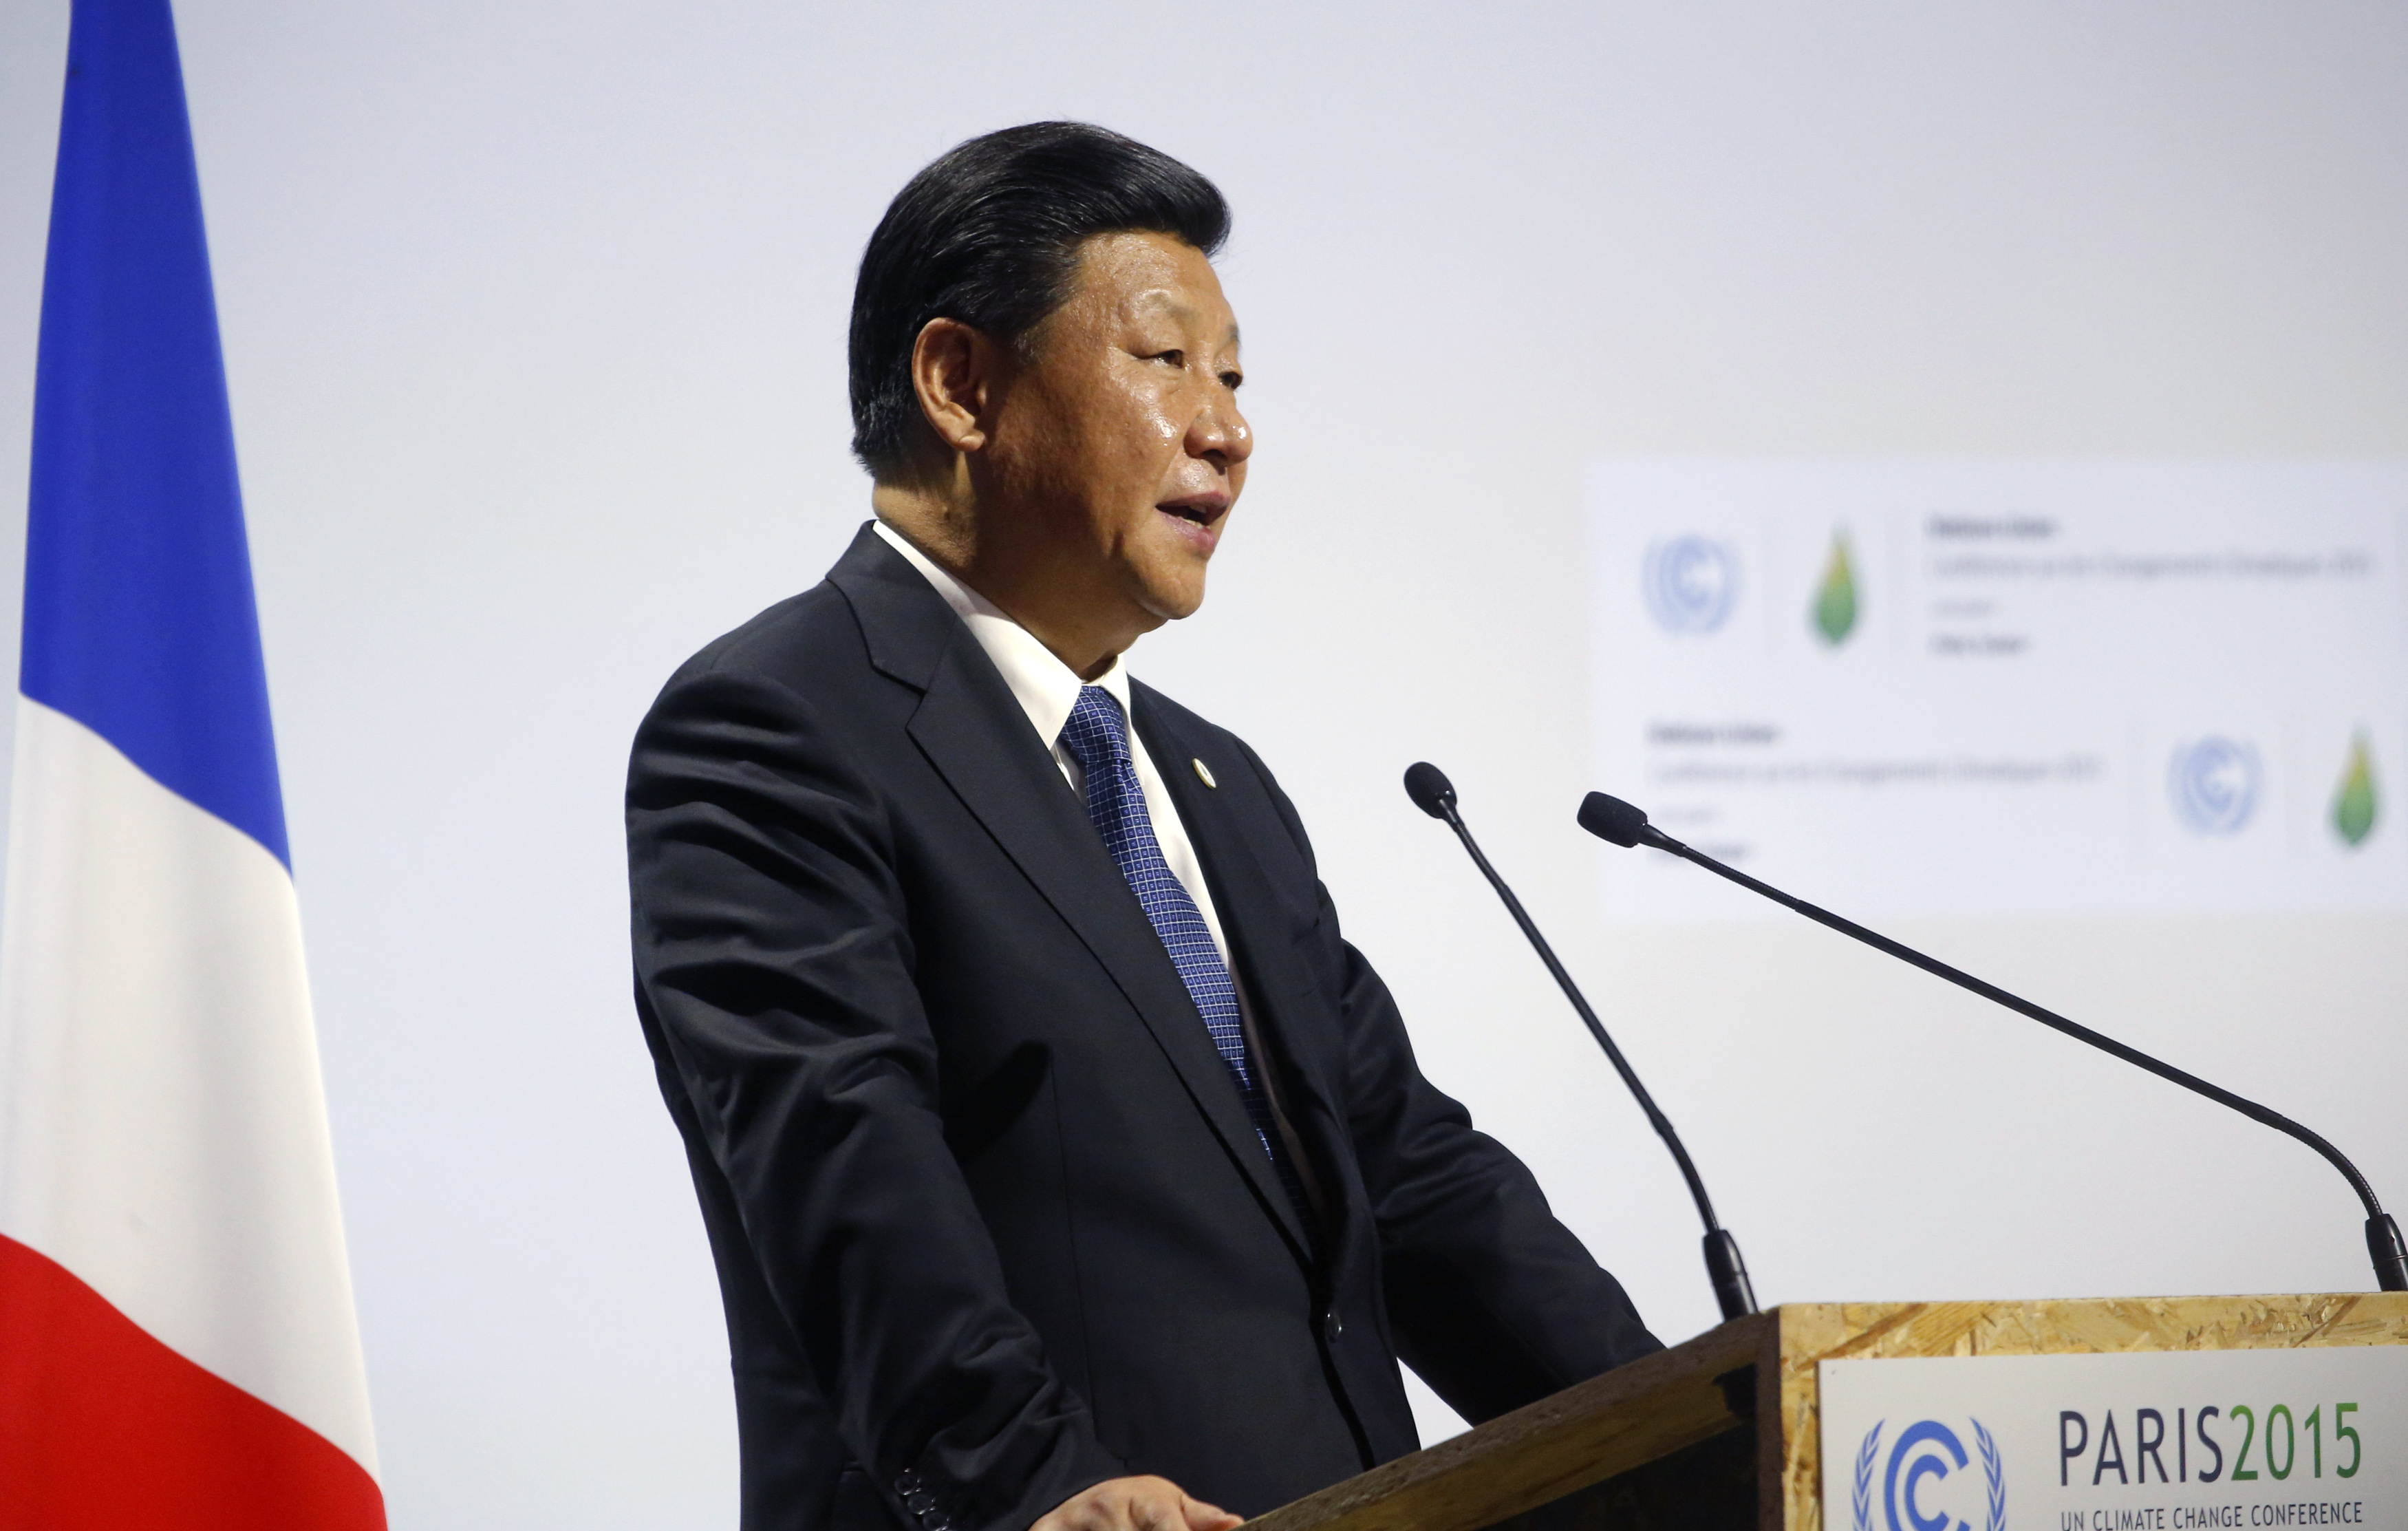 China's 'yes' to new role in climate battle